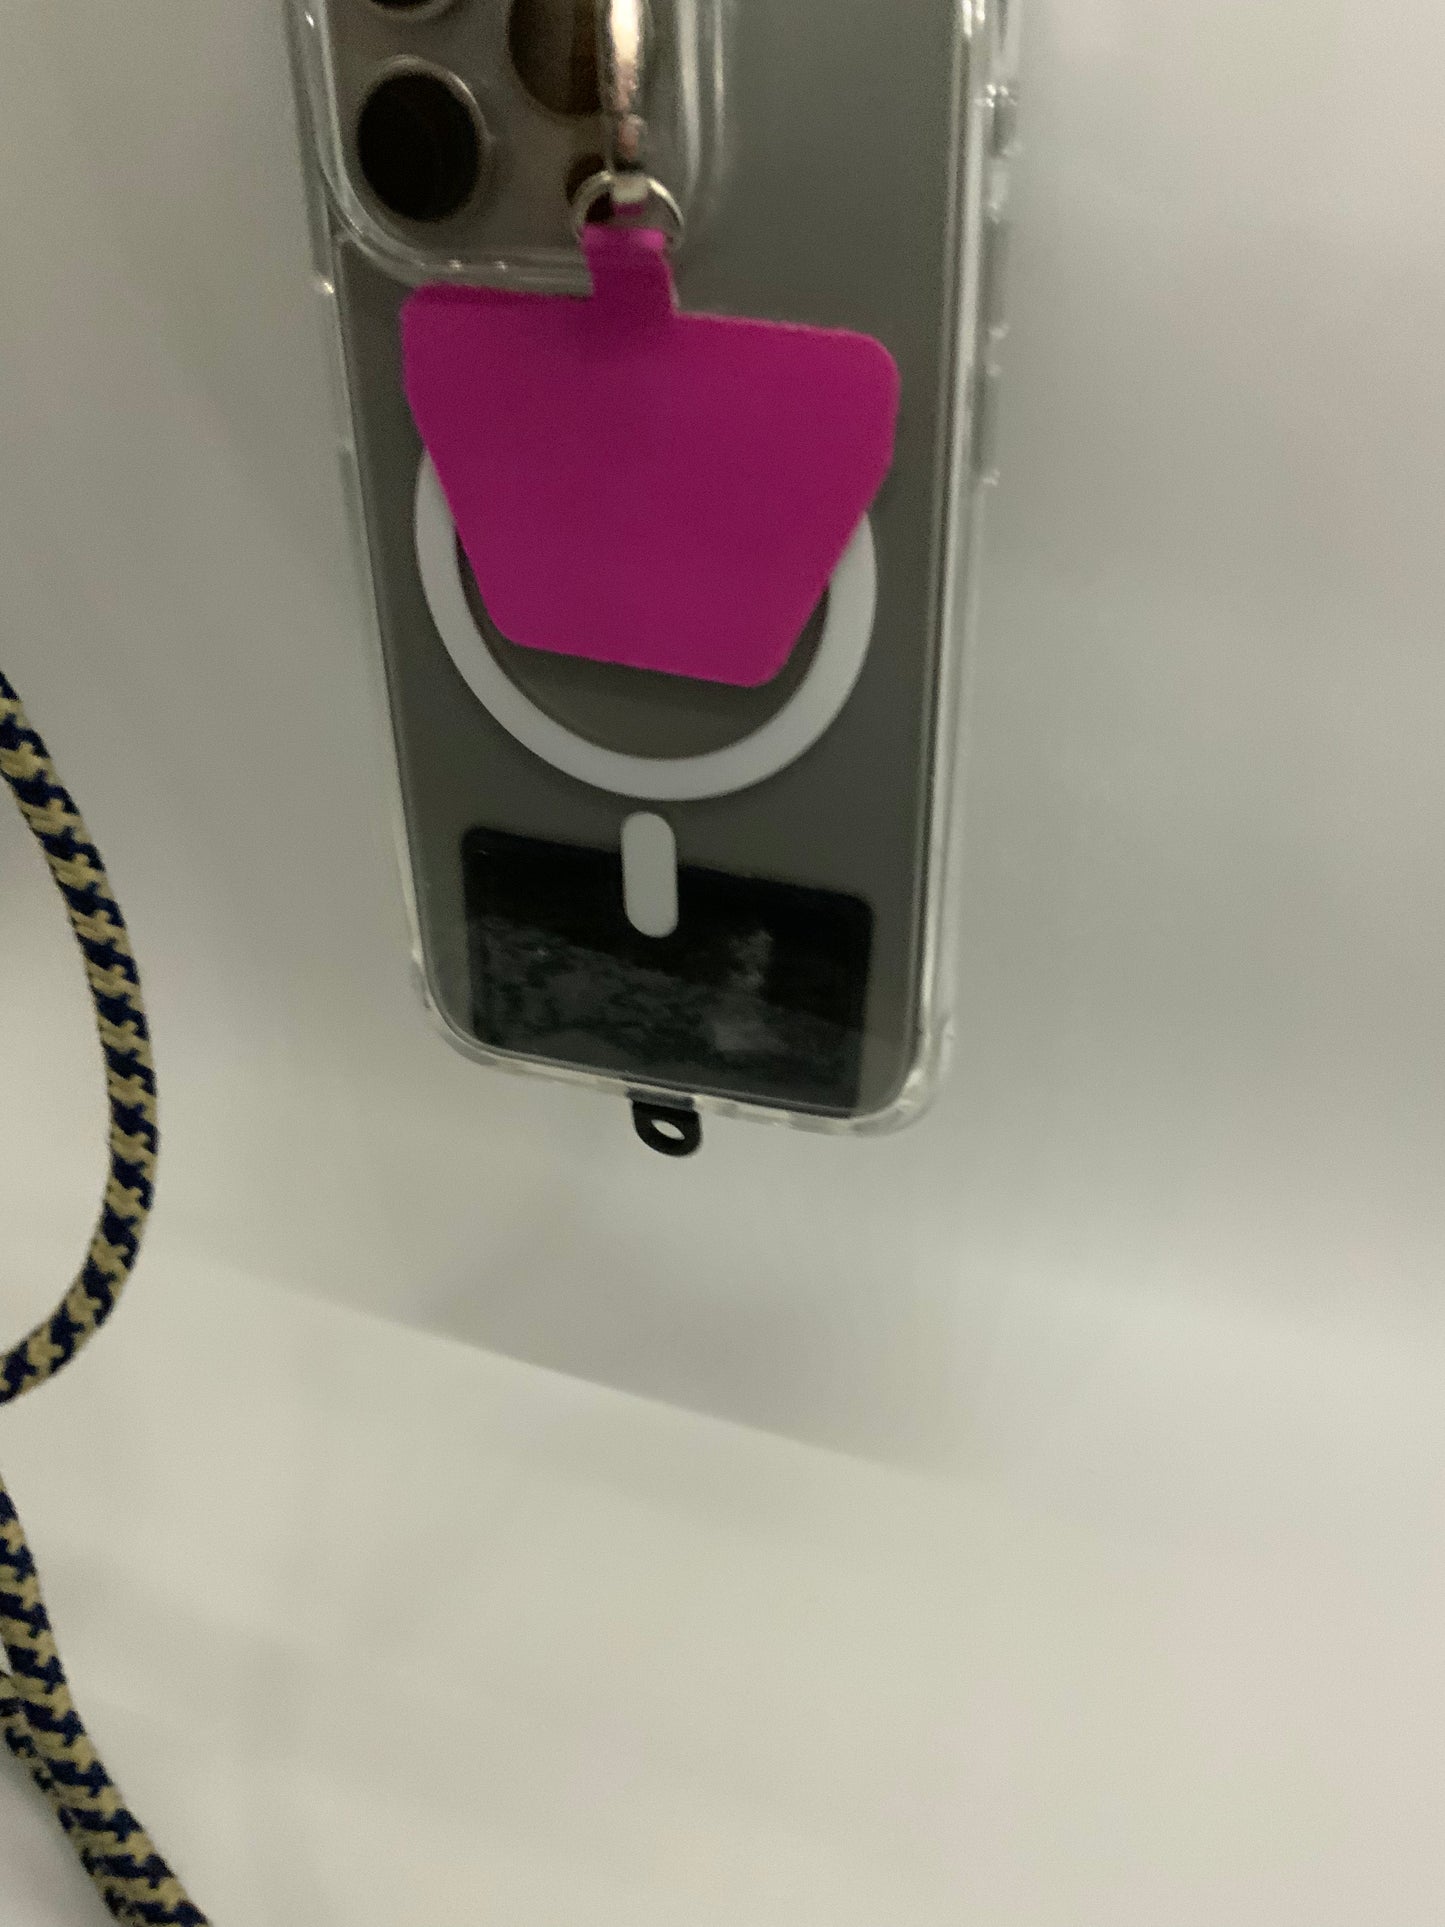 The picture shows a close-up of an object that appears to be a badge holder or a small device. It has a clear plastic casing with a slot at the top where a pink tag is attached through a metal loop. Below the slot, there is a white circular button with a black rectangular area beneath it. The background is plain white and there is a partial view of a cord with blue and yellow patterns at the bottom left corner of the picture.